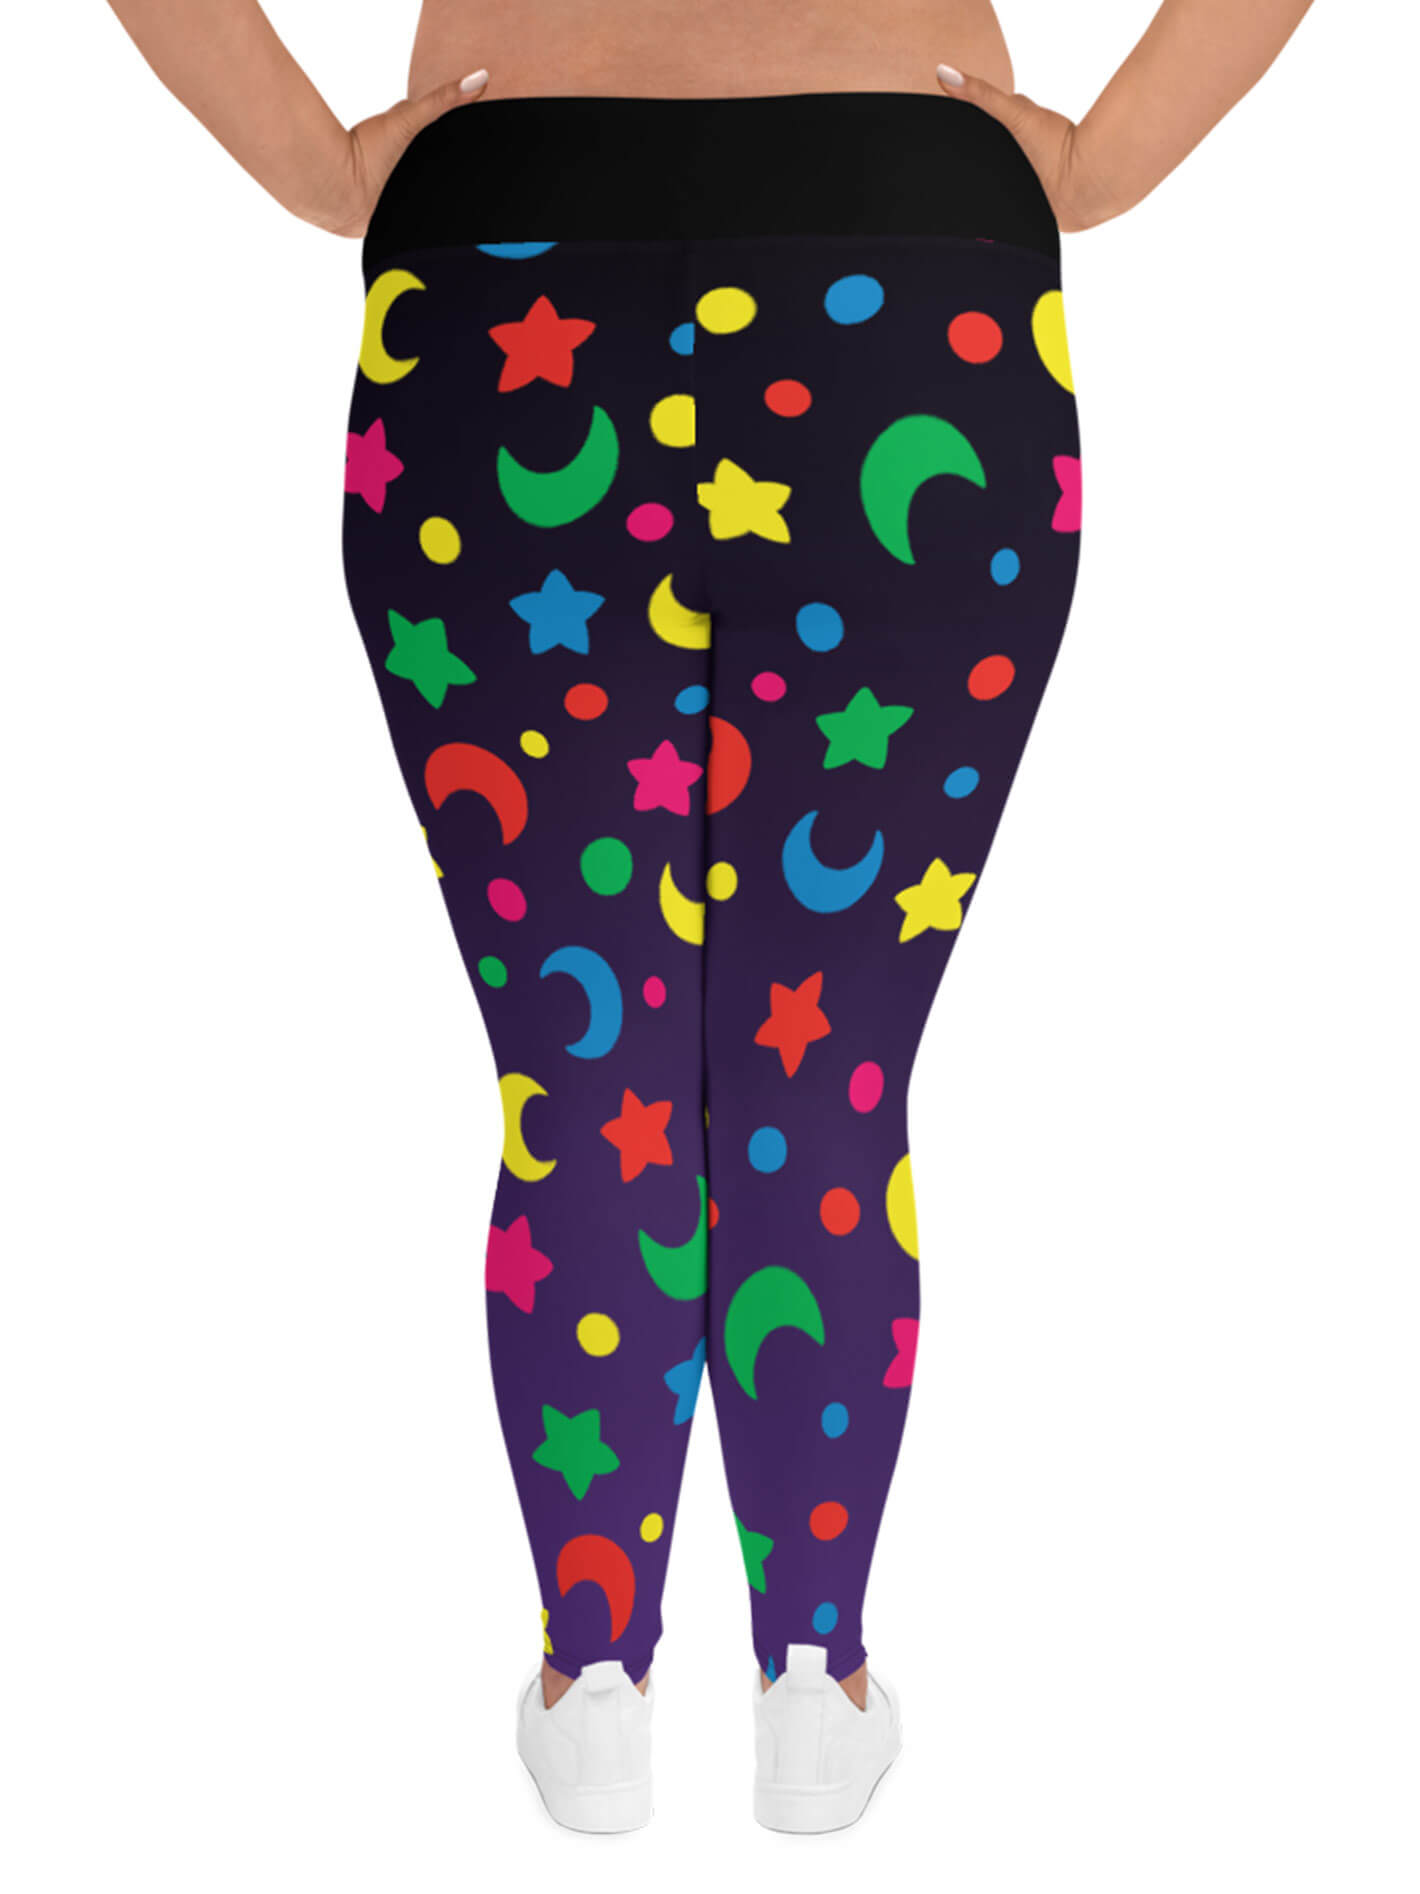 Plus size witch leggings.